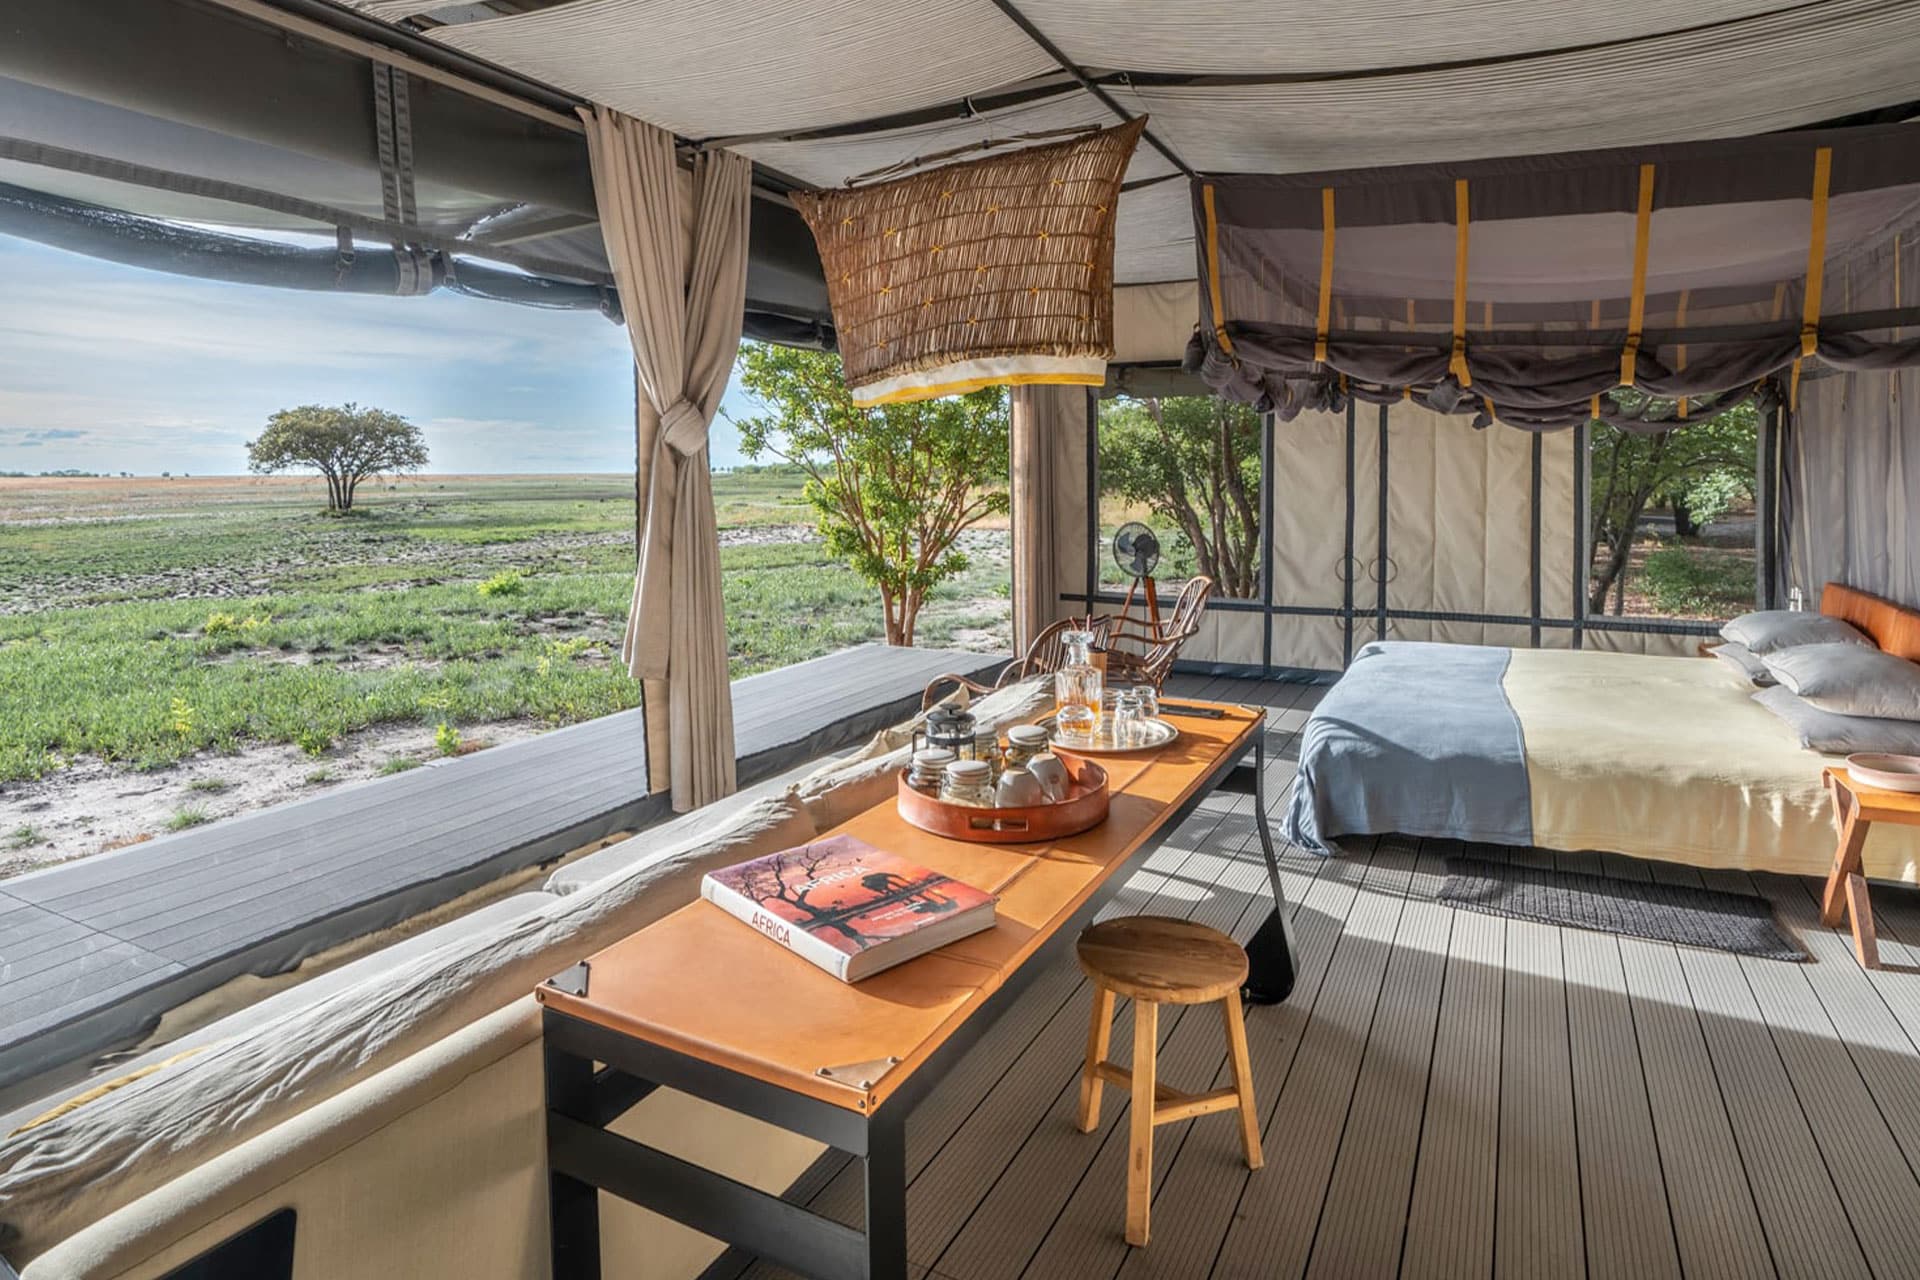 A luxury safari tent at King Lewanika with views of the wilderness.